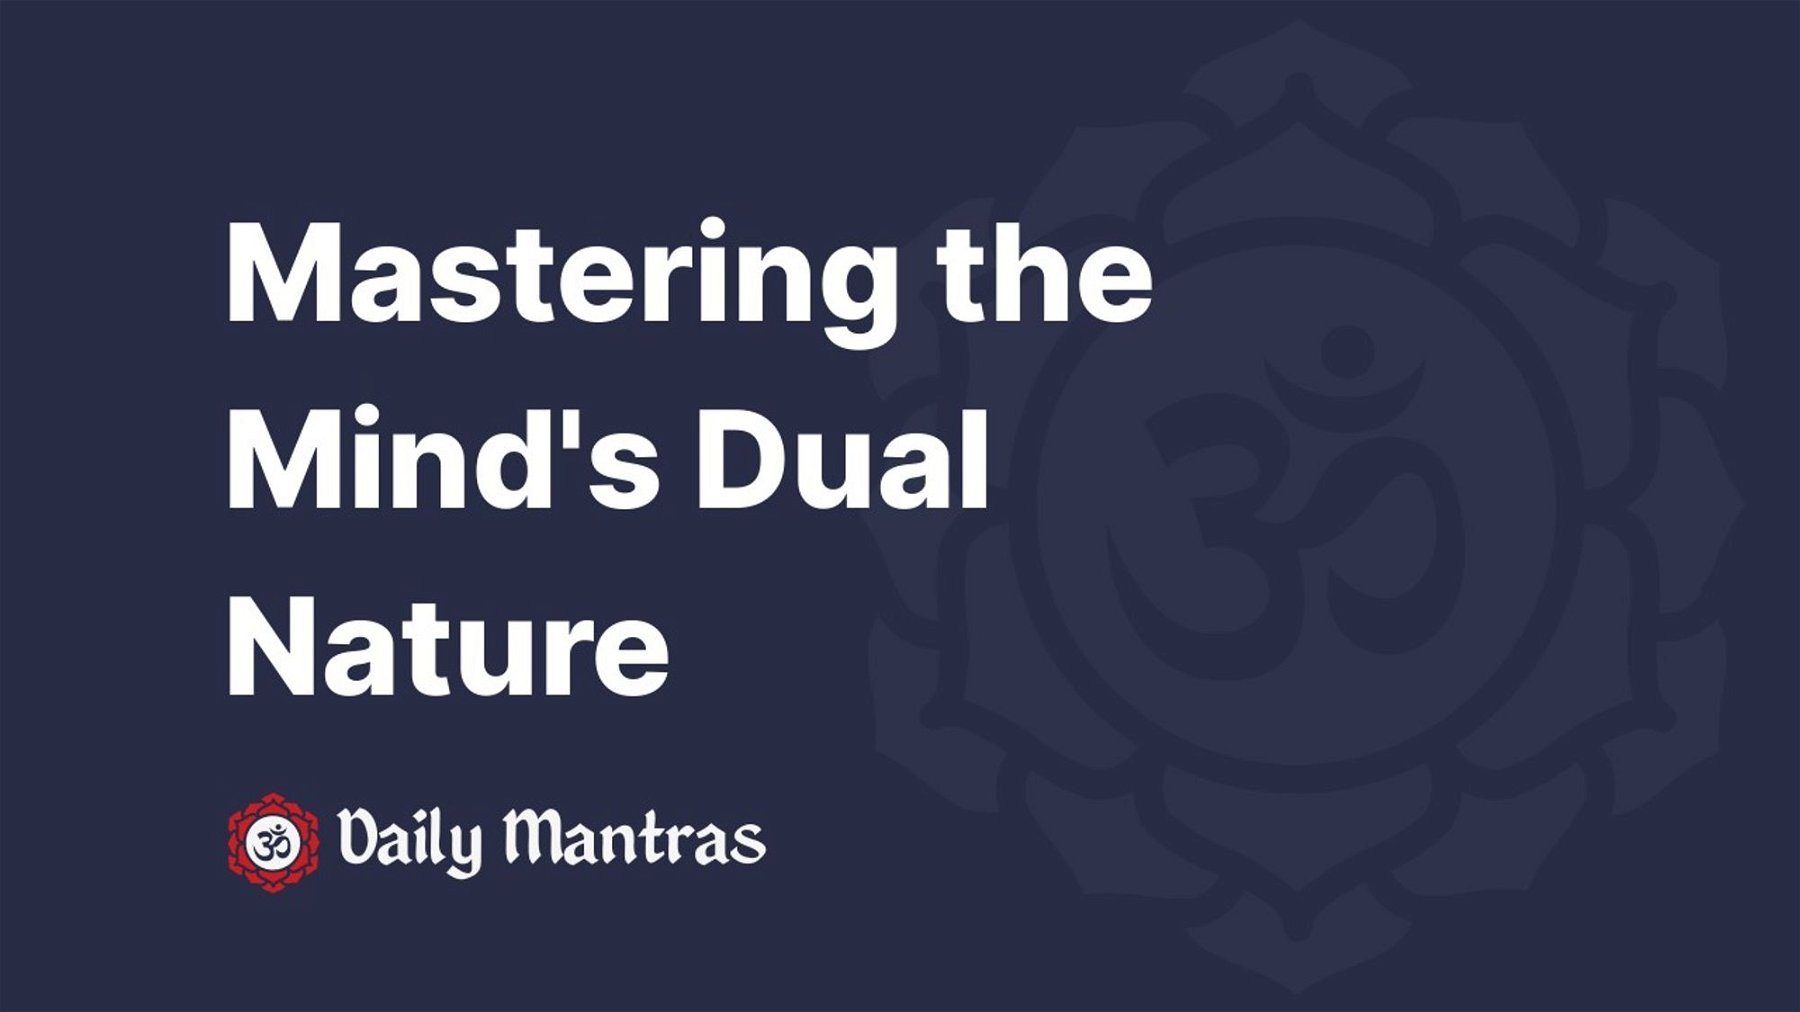 Mastering the Mind's Dual Nature